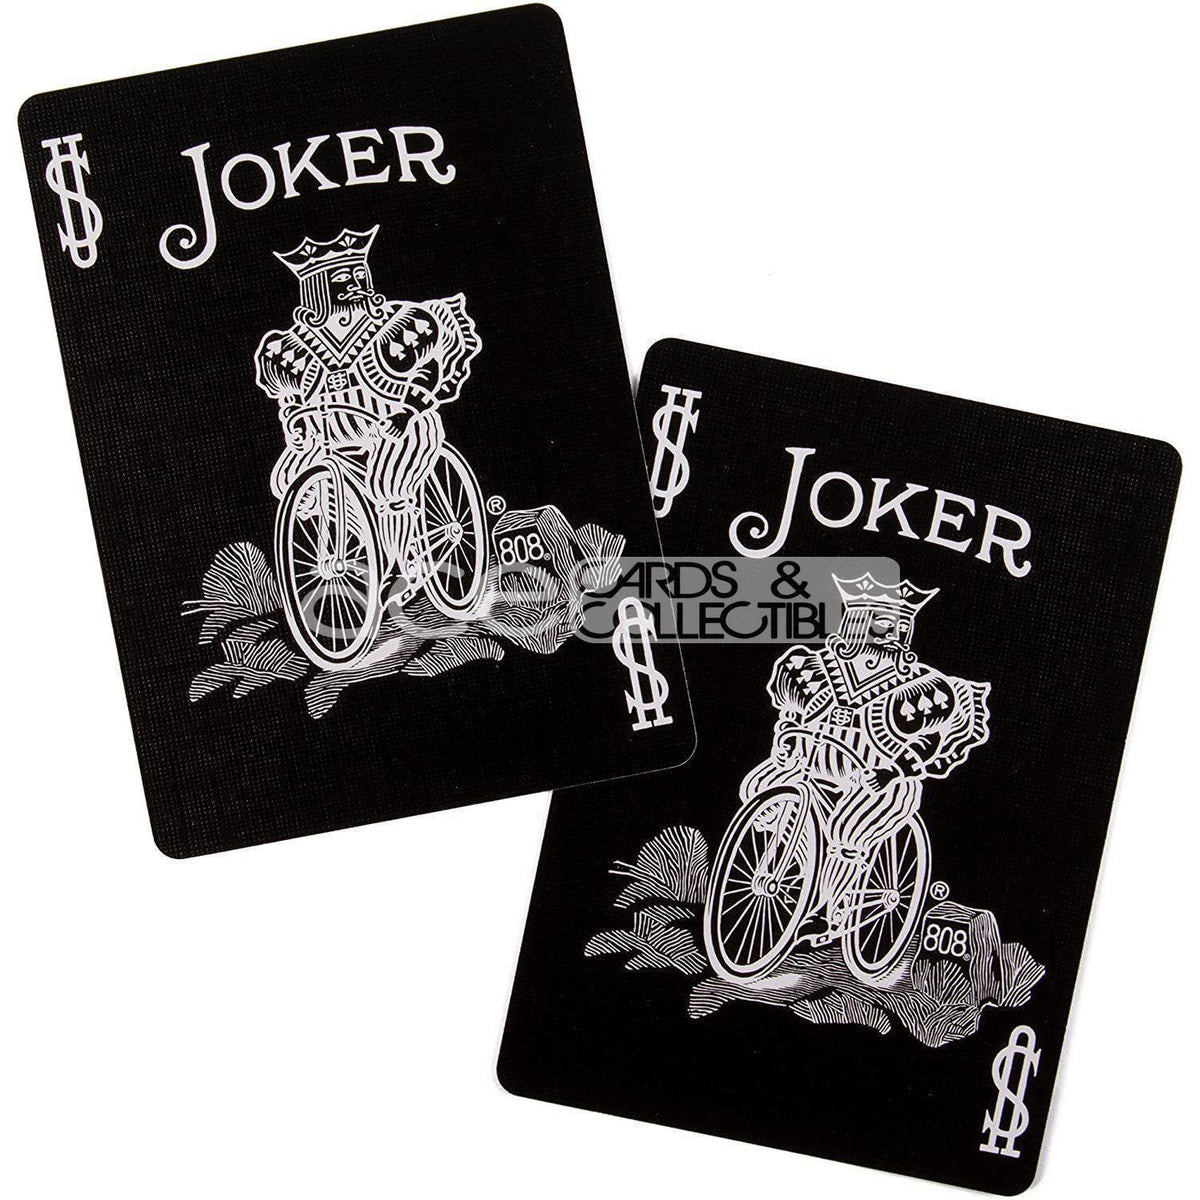 Bicycle Black Tiger Deck Playing Cards-United States Playing Cards Company-Ace Cards &amp; Collectibles